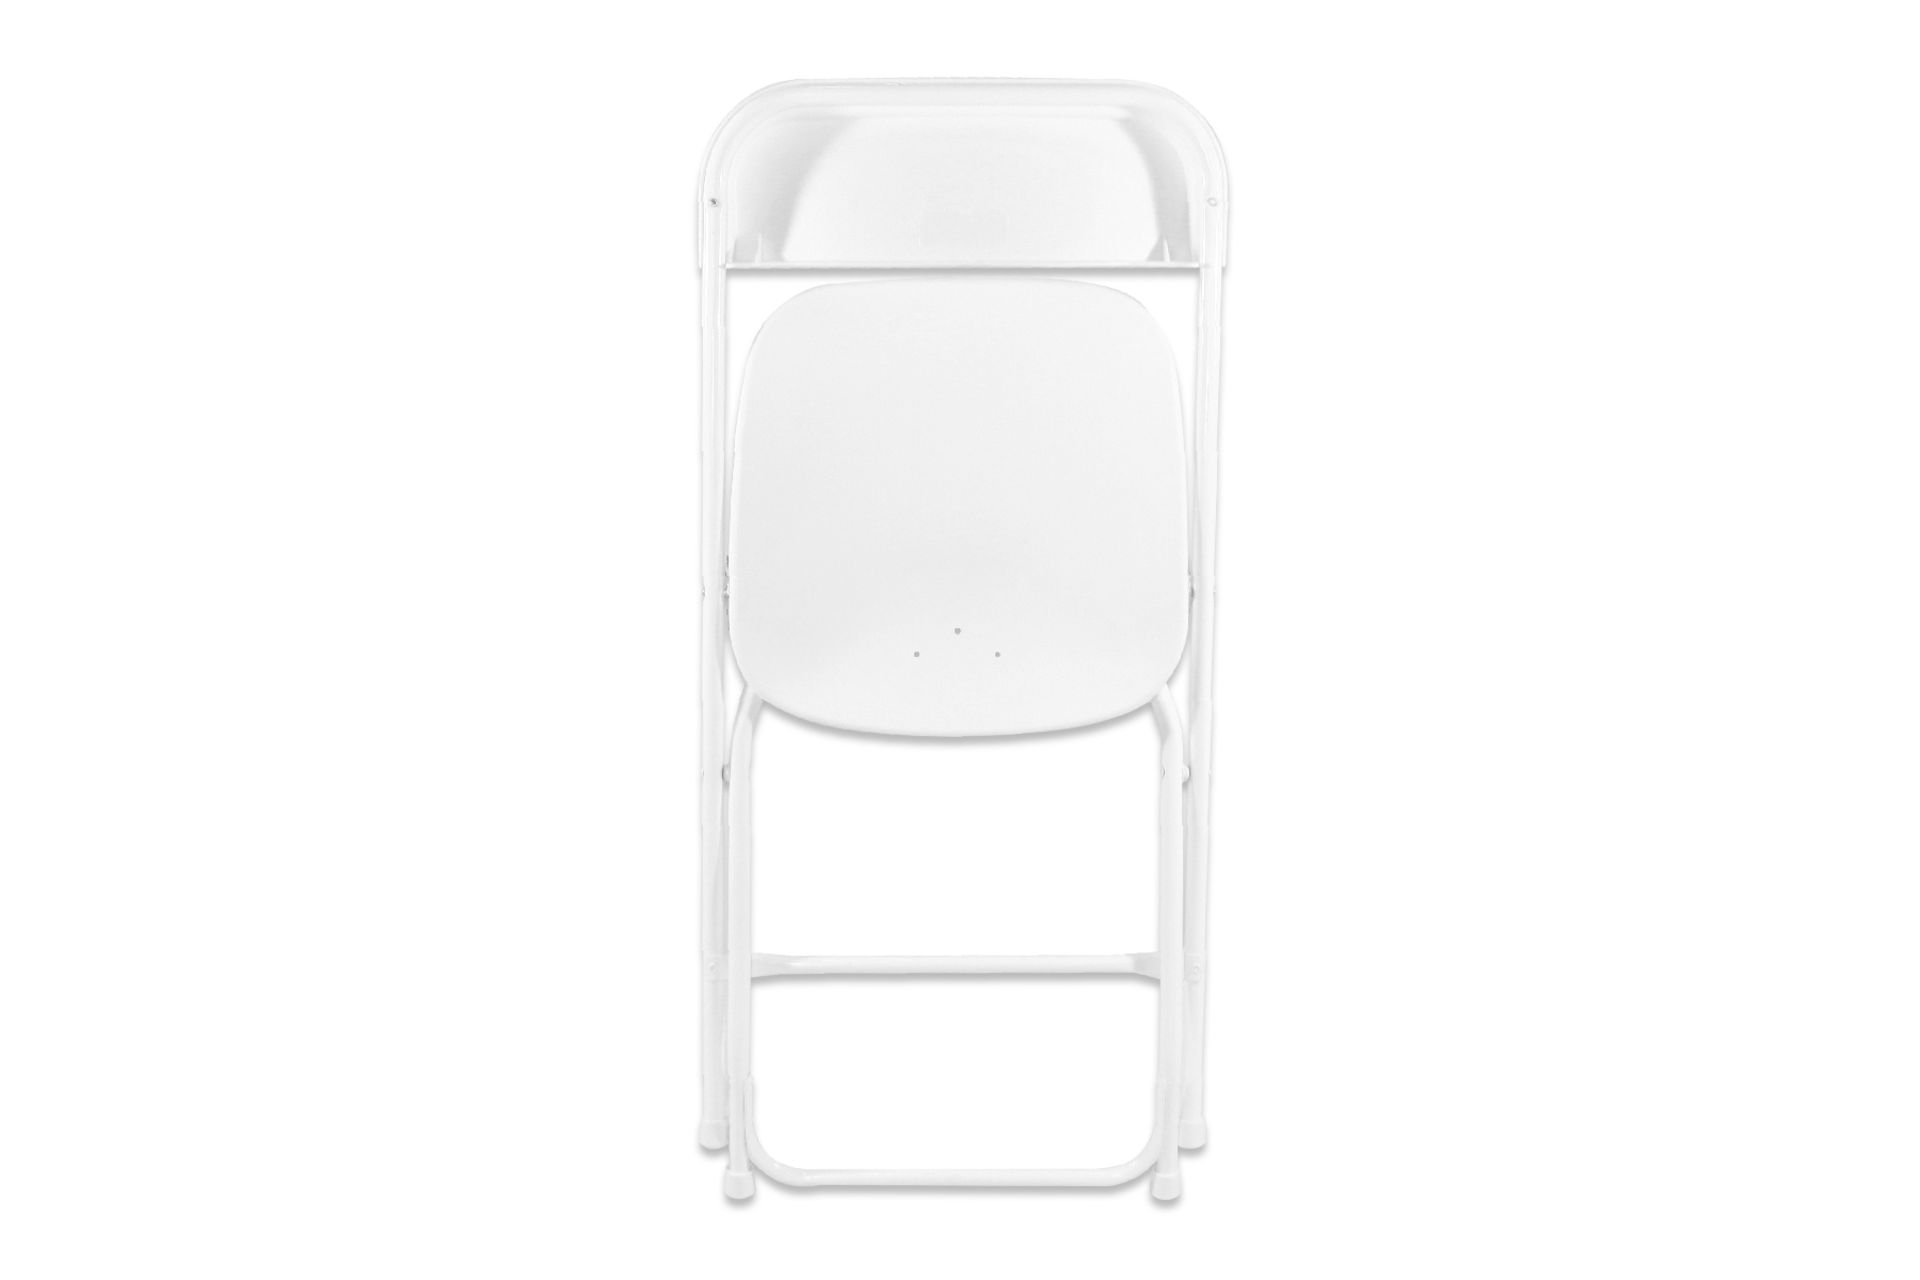 V *TRADE QTY* Grade A Folding Plastic Chair - White X150 YOUR BID PRICE TO BE MULTIPLIED BY ONE - Image 3 of 6